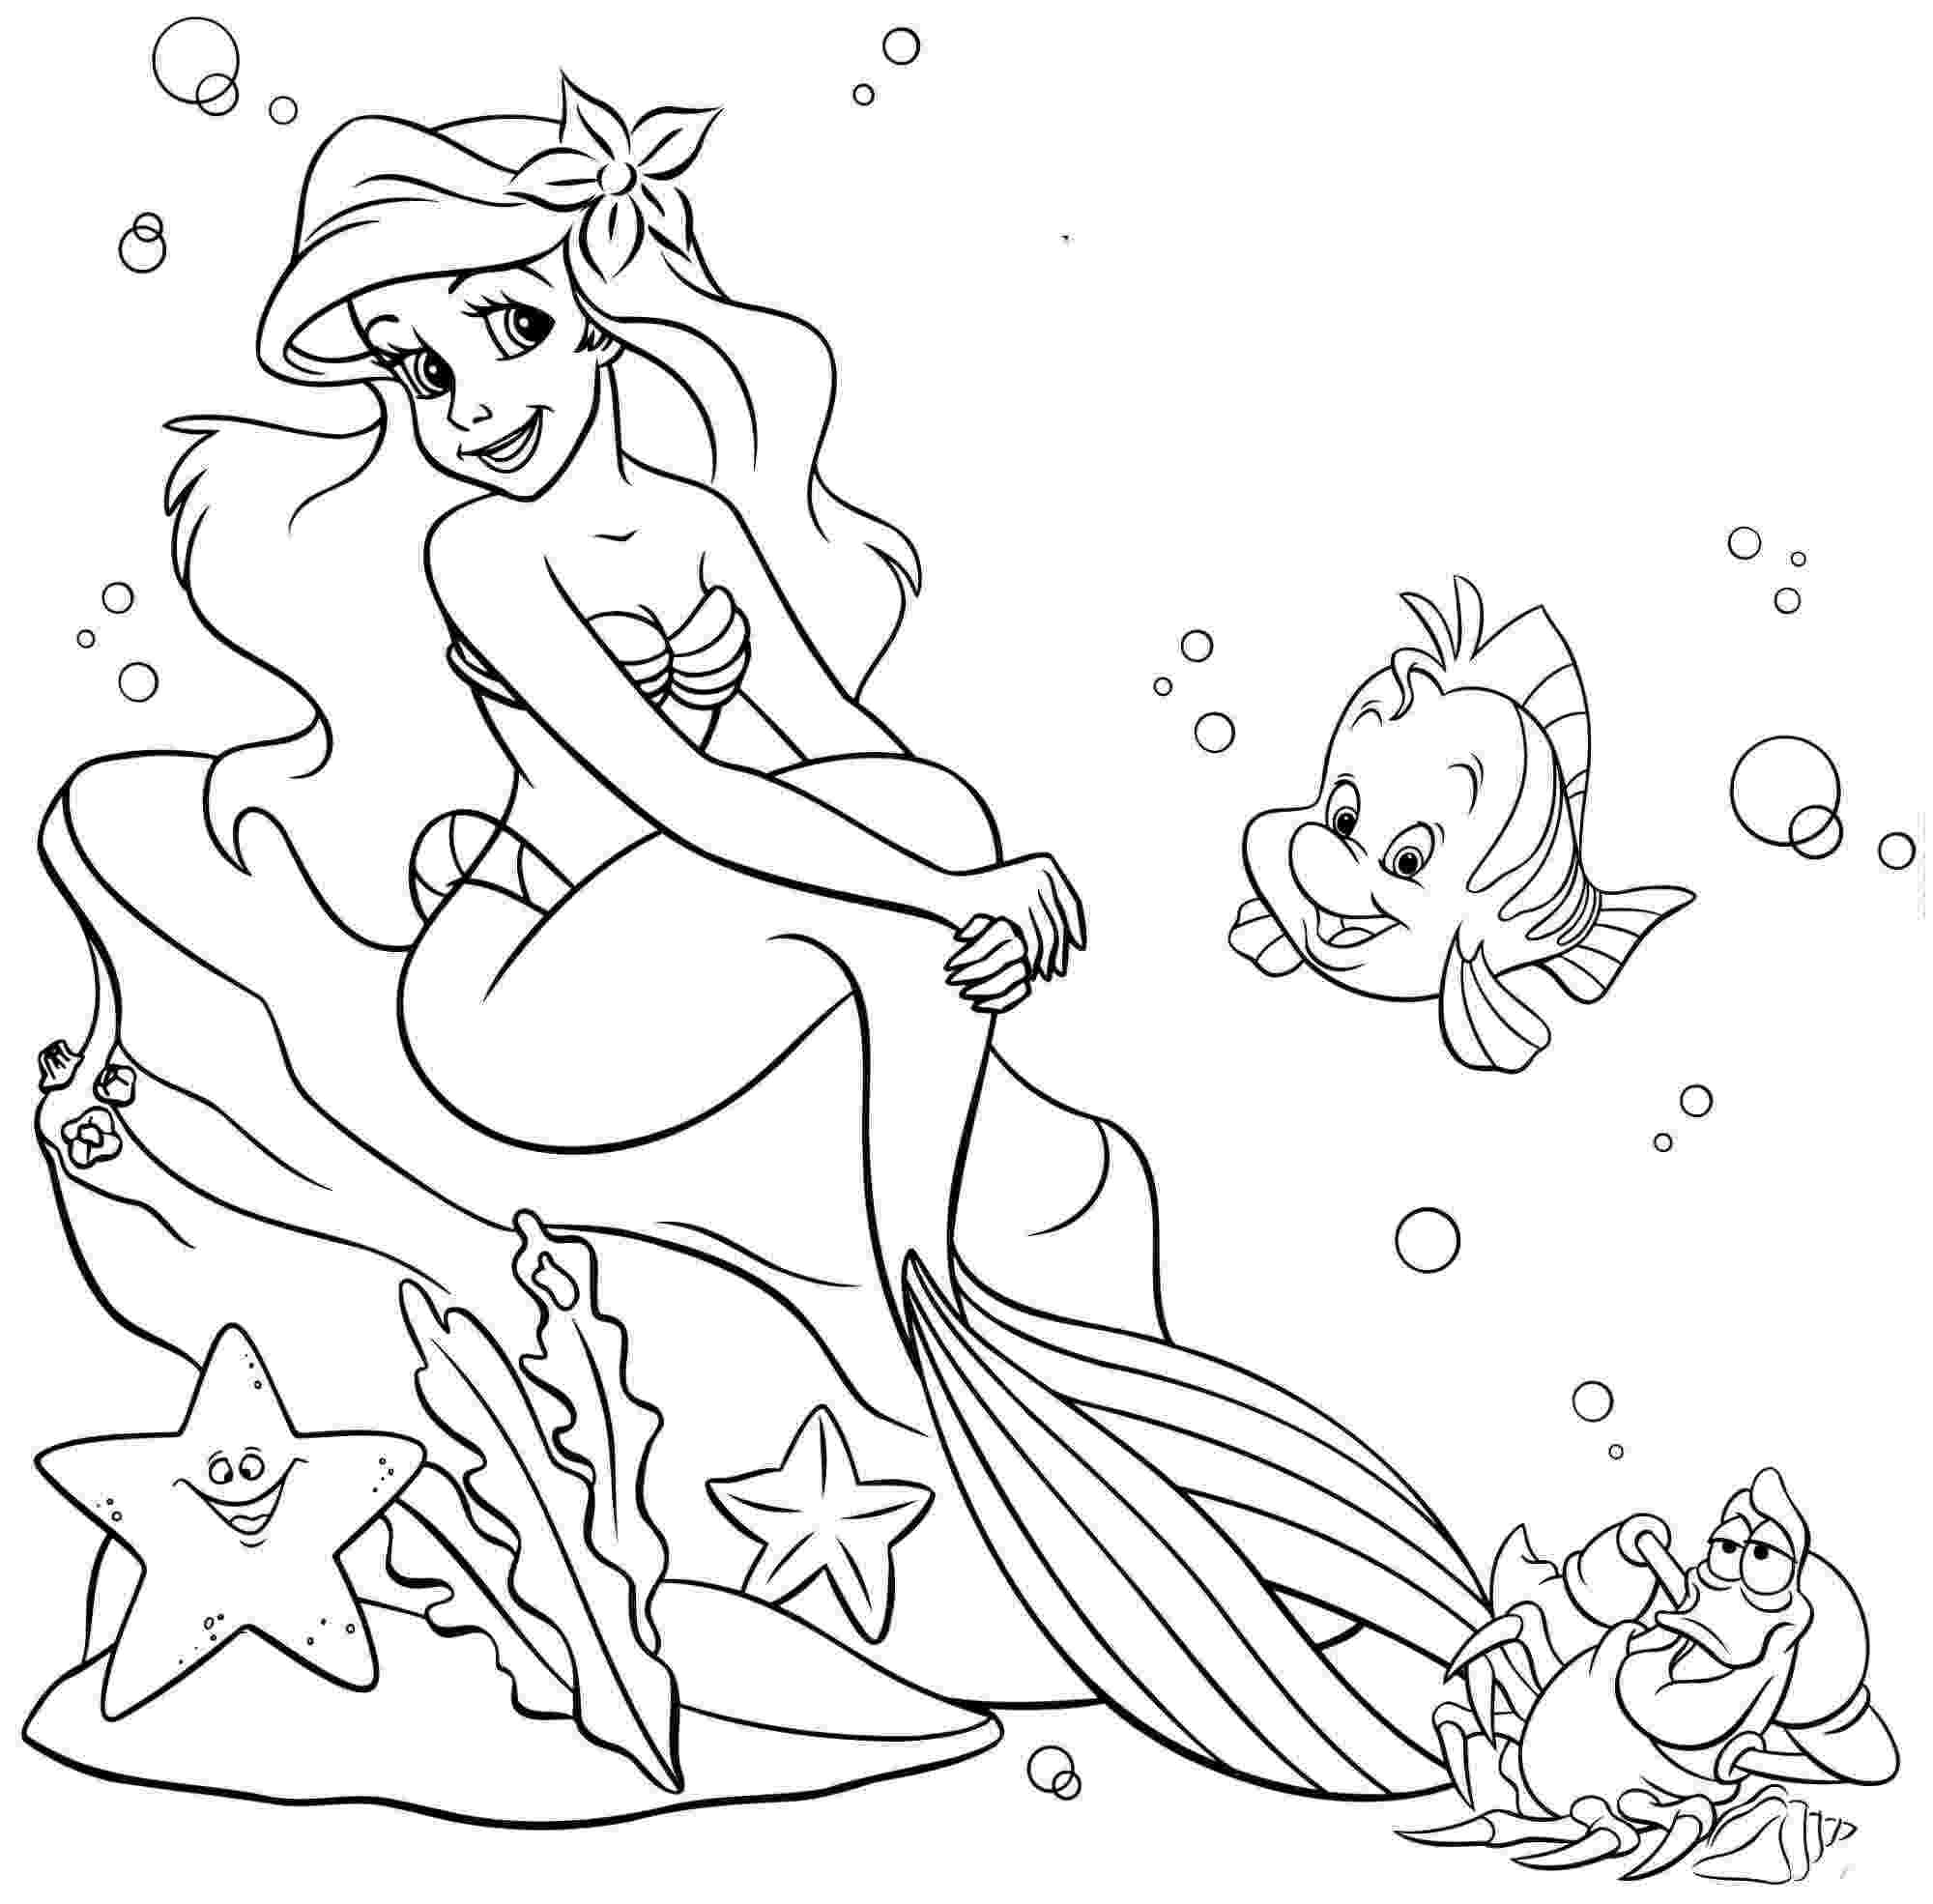 ariel the little mermaid coloring pages the little mermaid coloring pages to download and print little ariel mermaid pages the coloring 